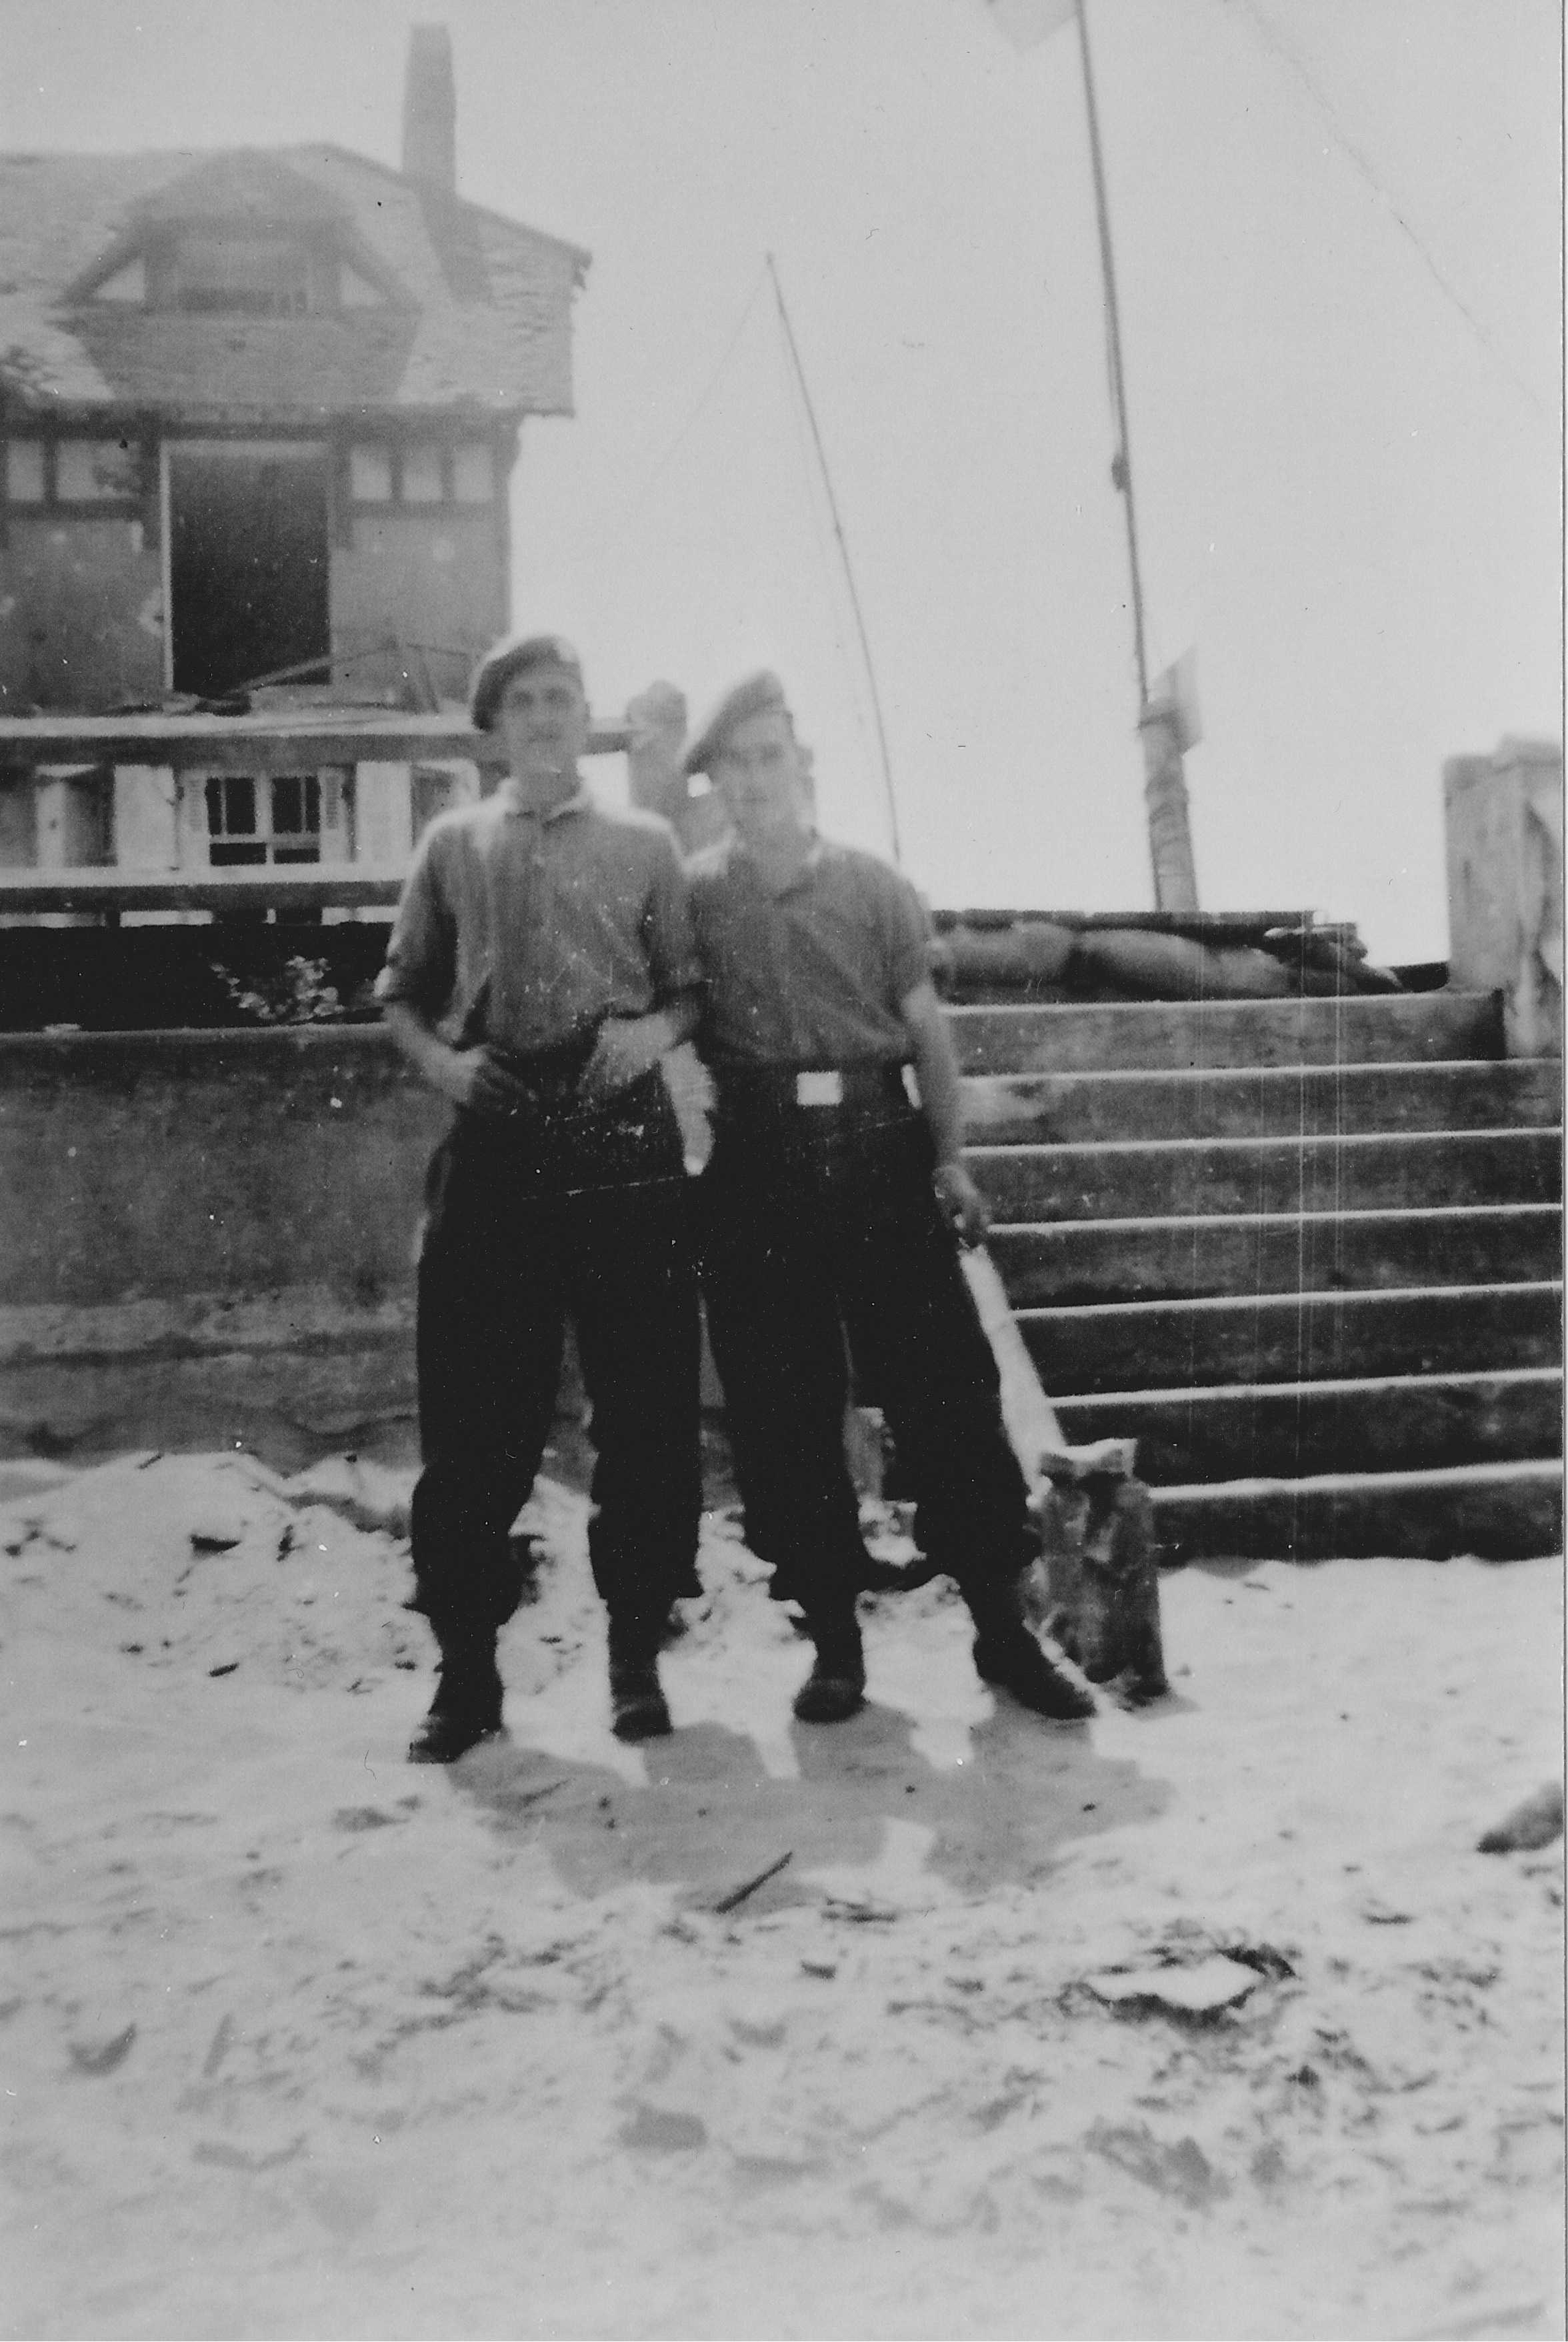 Black and white photograph. Two Canadian soldiers stand in front of the sea wall; there is a stone staircase to their left. A house is visible in the background, with a window blown out. They stand on a sandy beach.